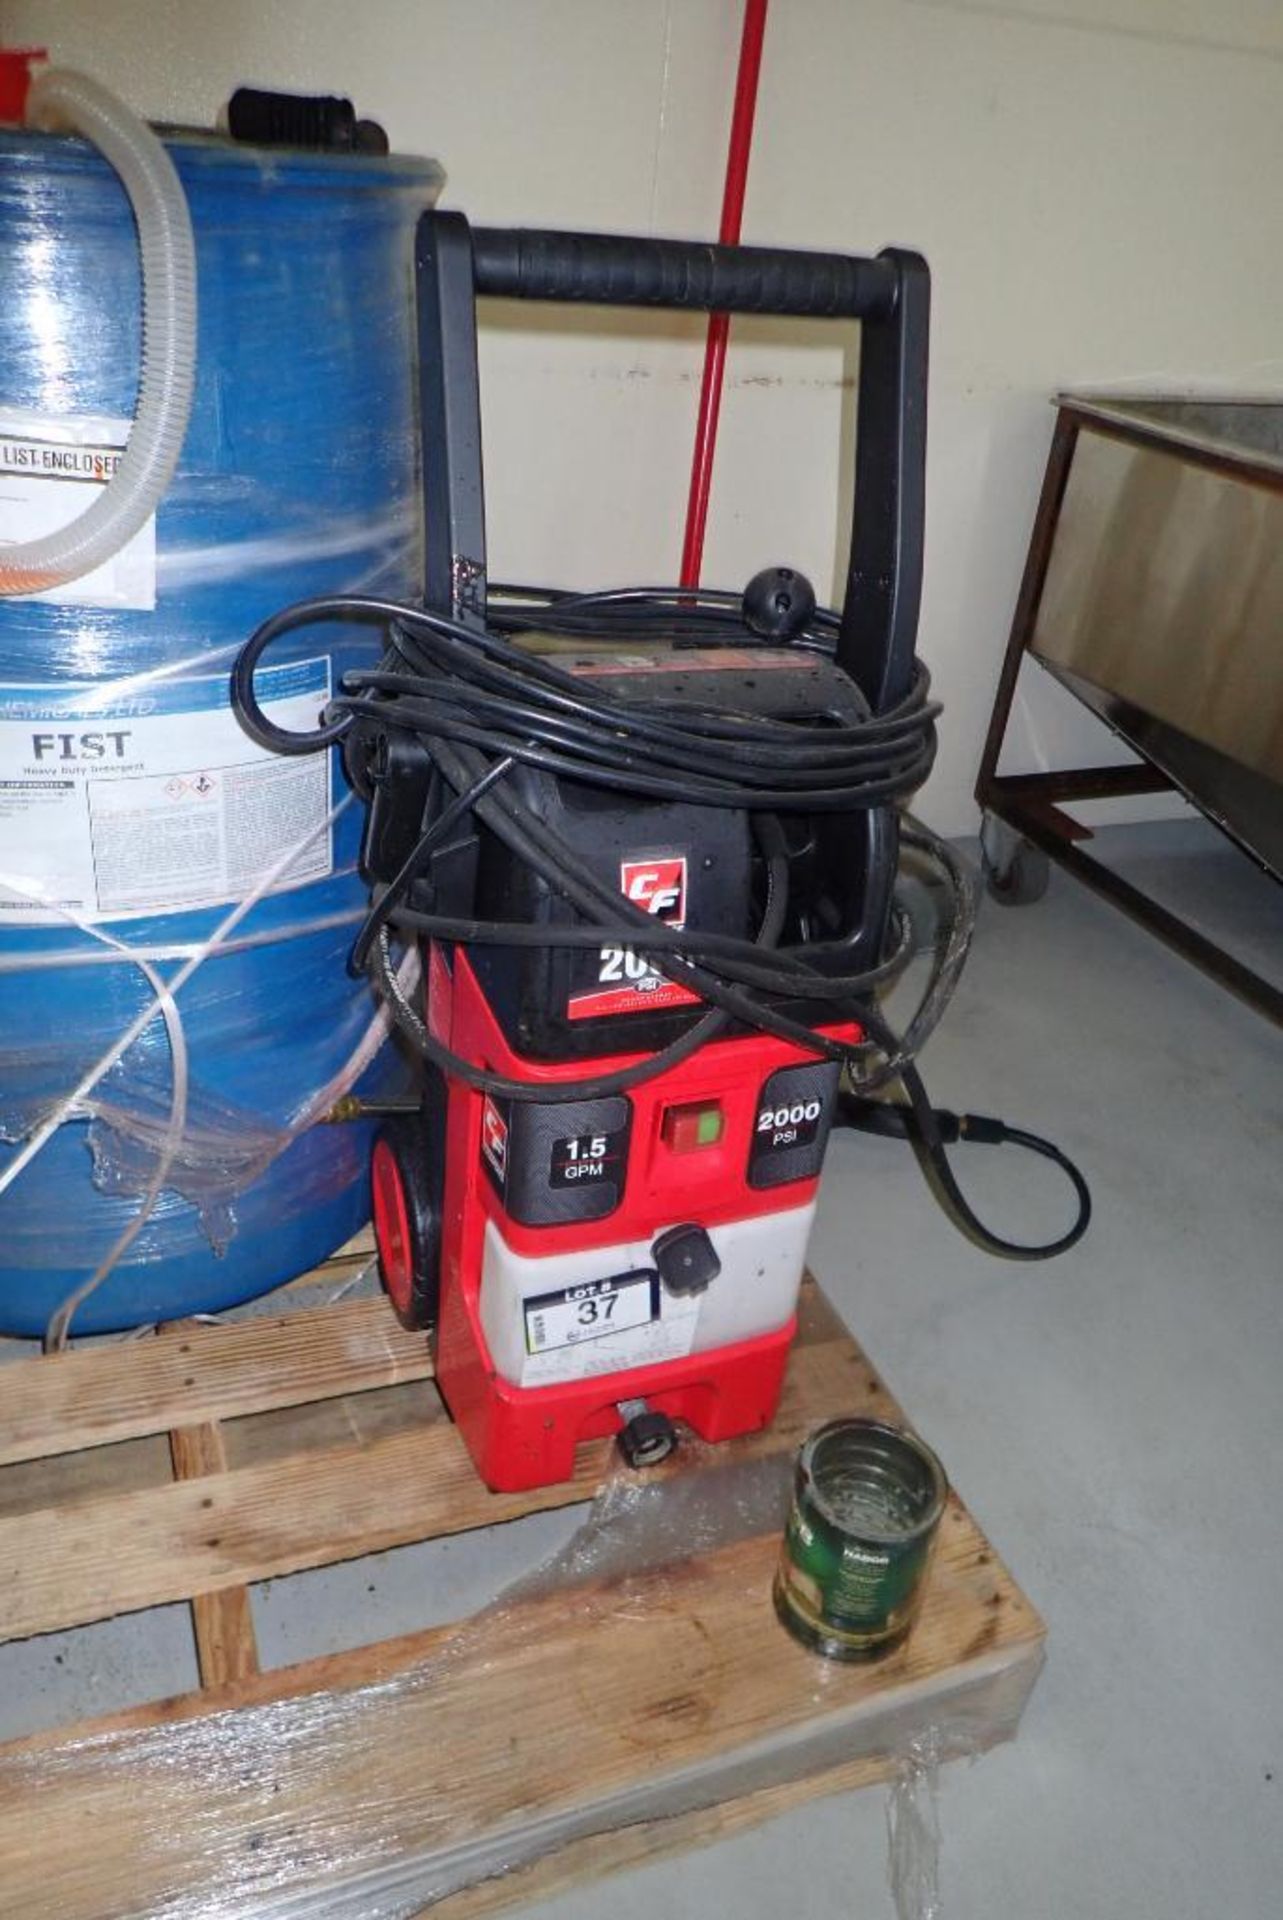 Lot of CleanForce Electric Pressure Washer and Fist Heavy Duty Detergent. - Image 2 of 3